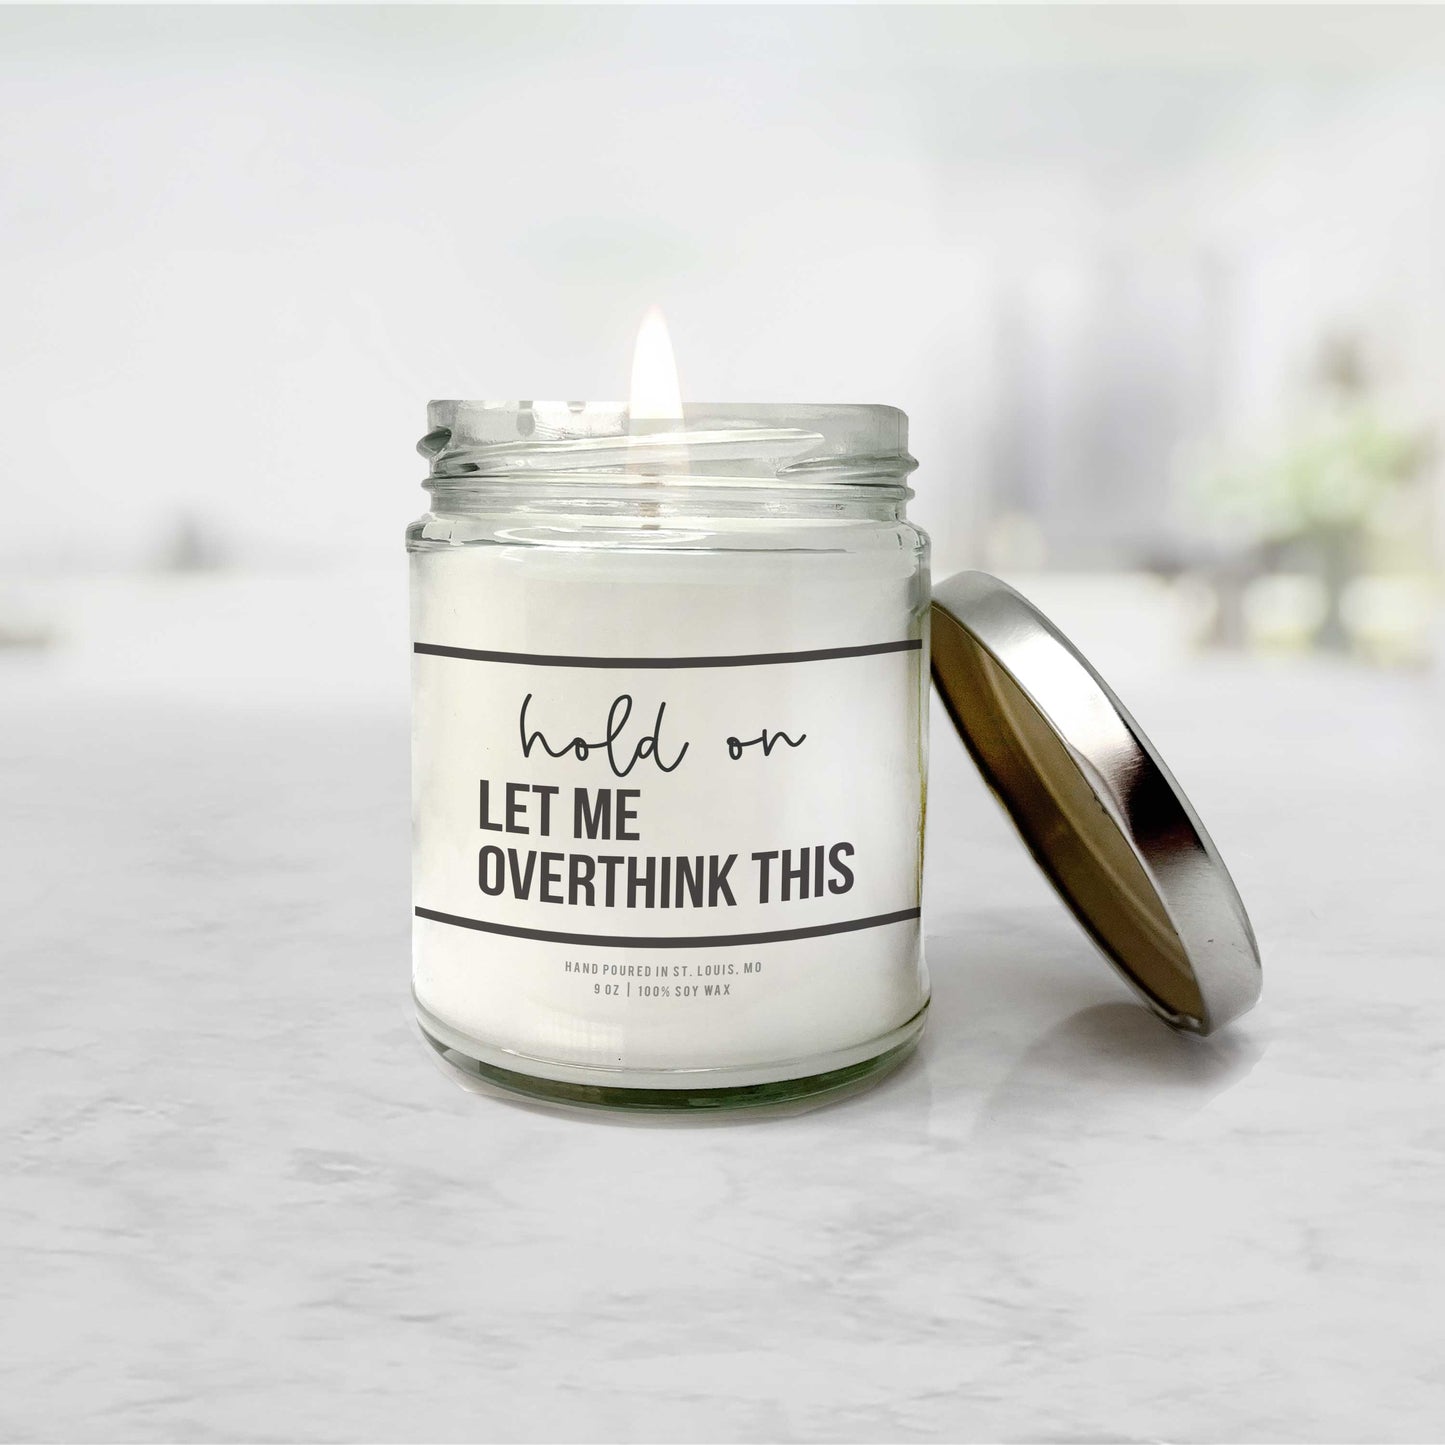 Hold on Let me Overthink This Candle - Paisley Grace Makery